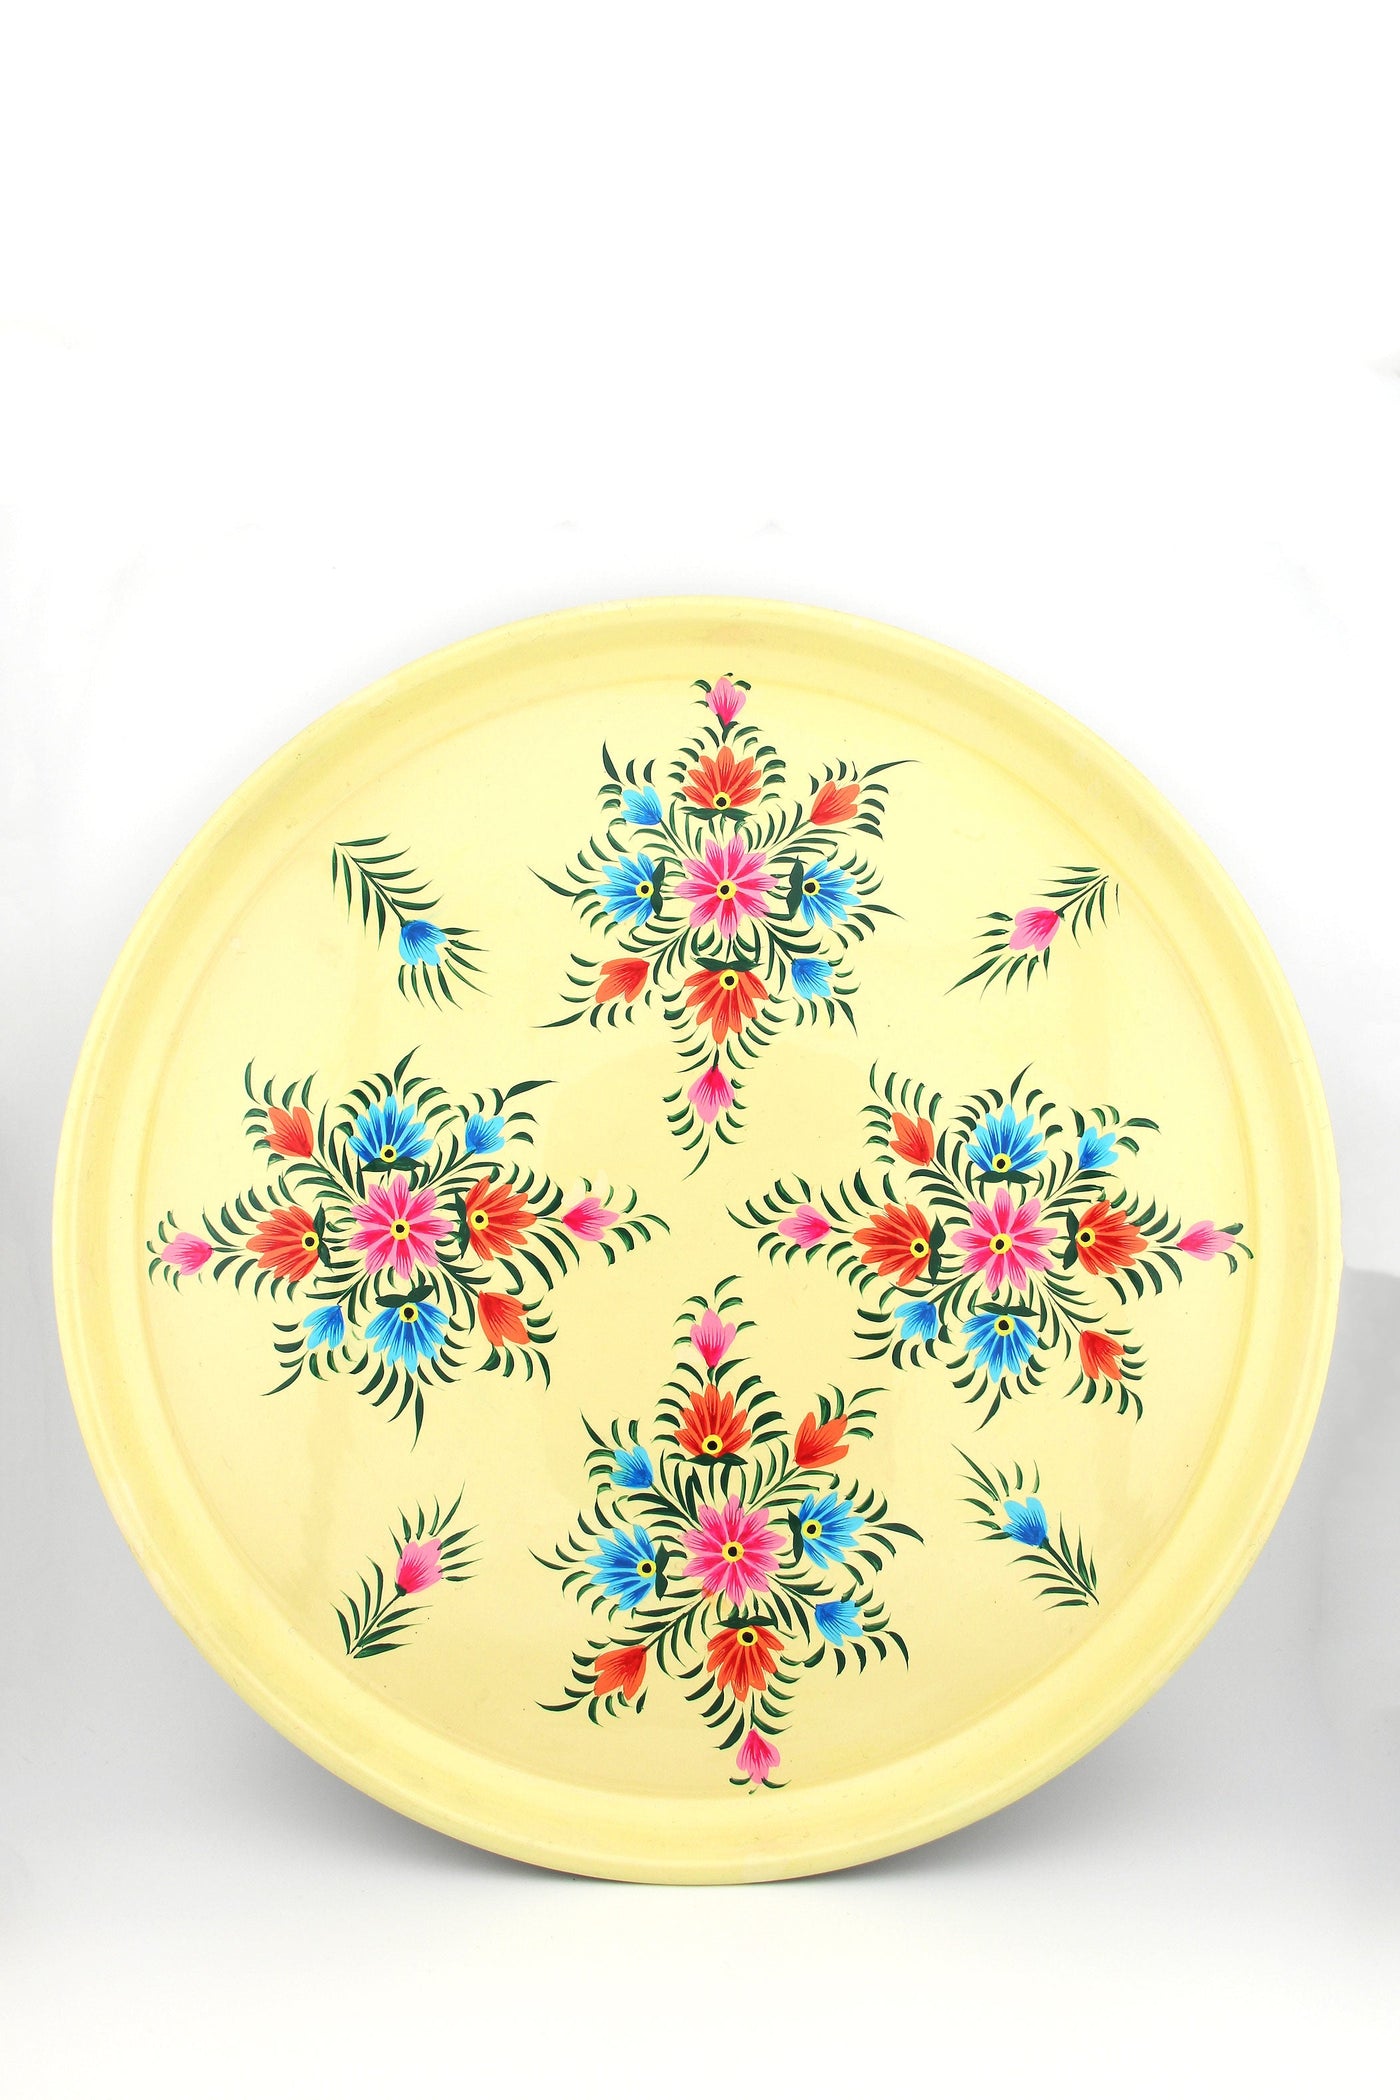 Floral Handpainted Stainless Steel Large Tray, Picnic Folk from Kashmir